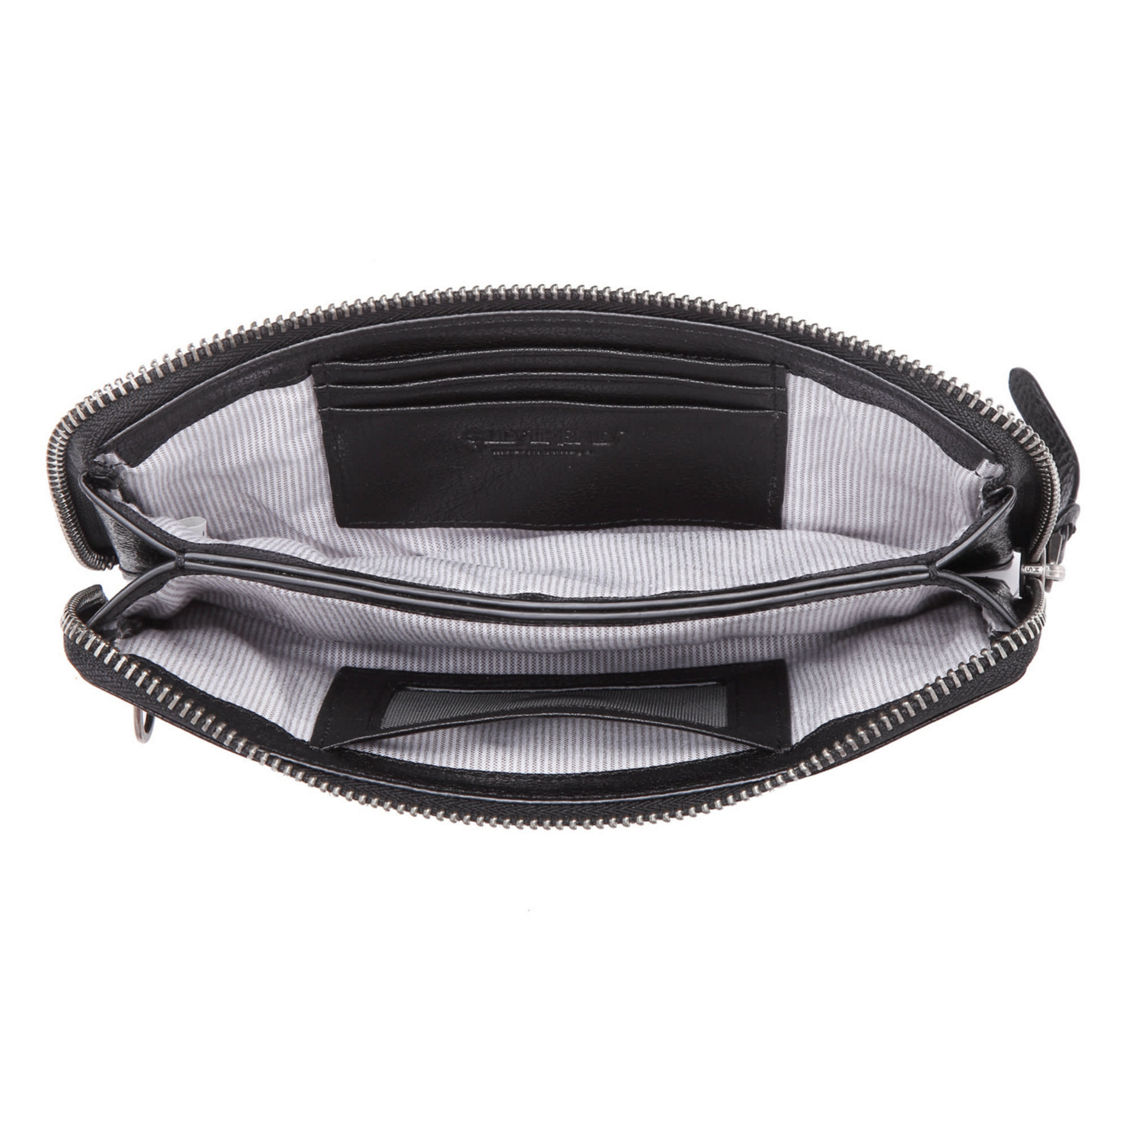 Old Trend Snapper Leather Clutch - Image 3 of 5